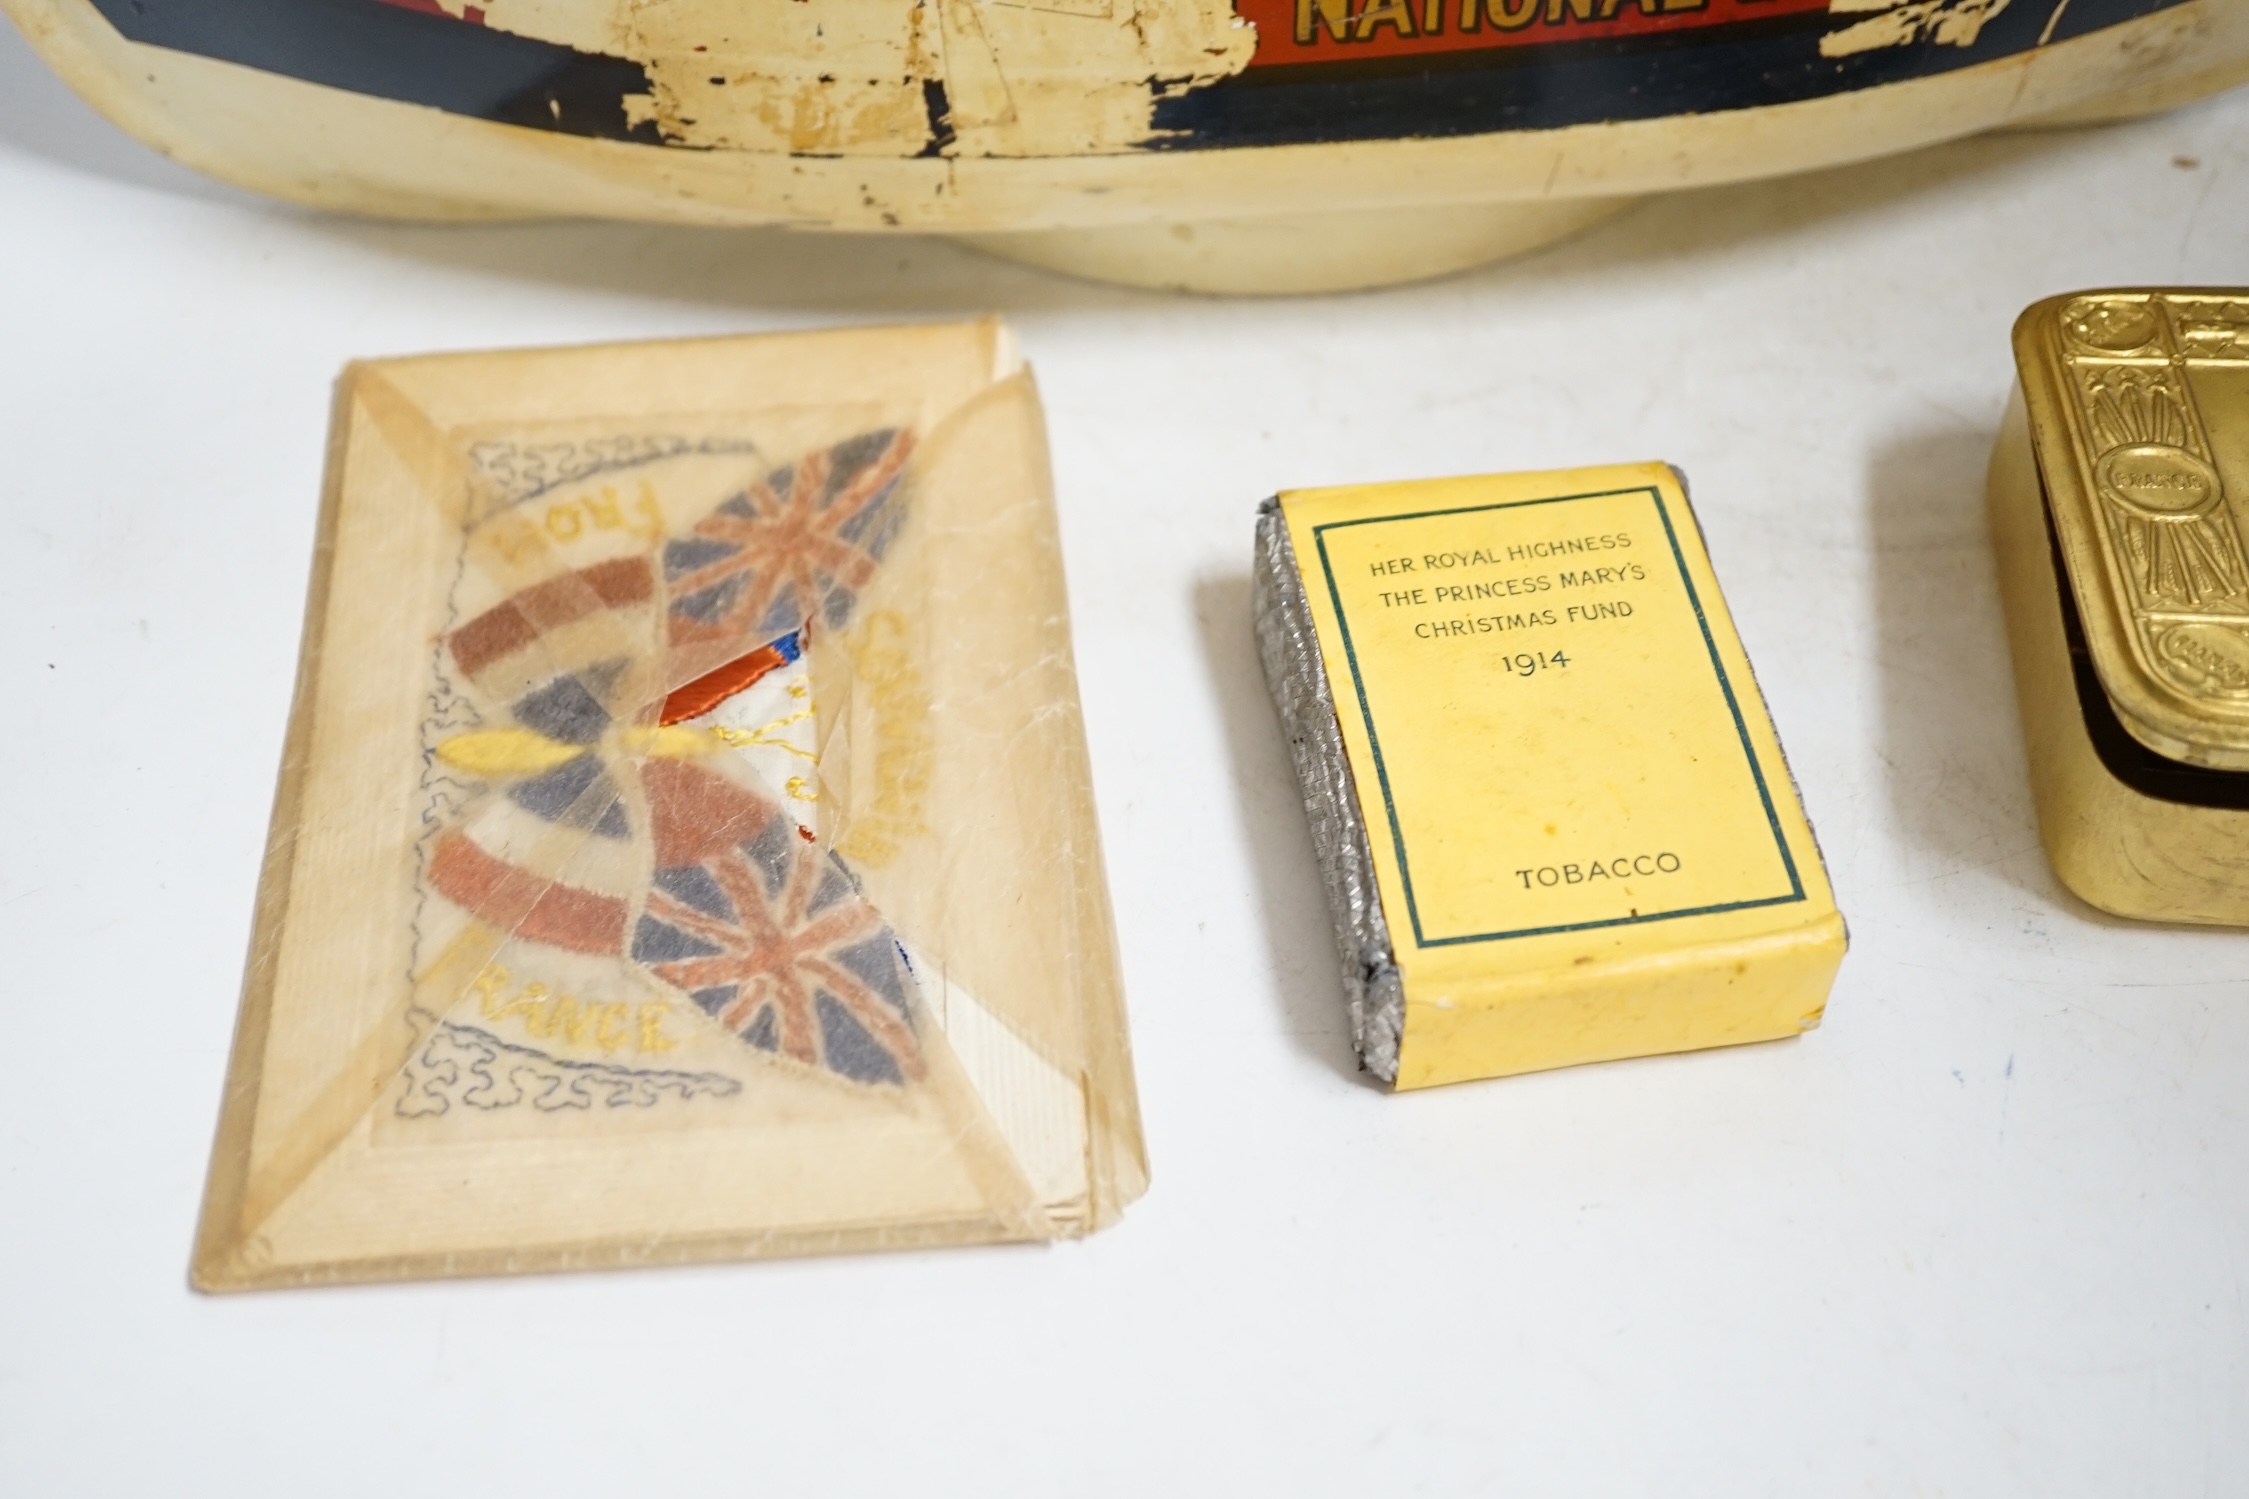 An RNLI sheet metal collecting box in the form of a lifeboat, together with a First World War Princess Mary Christmas tin containing the original tobacco, greetings card, photograph, and other items, plus two early 20th